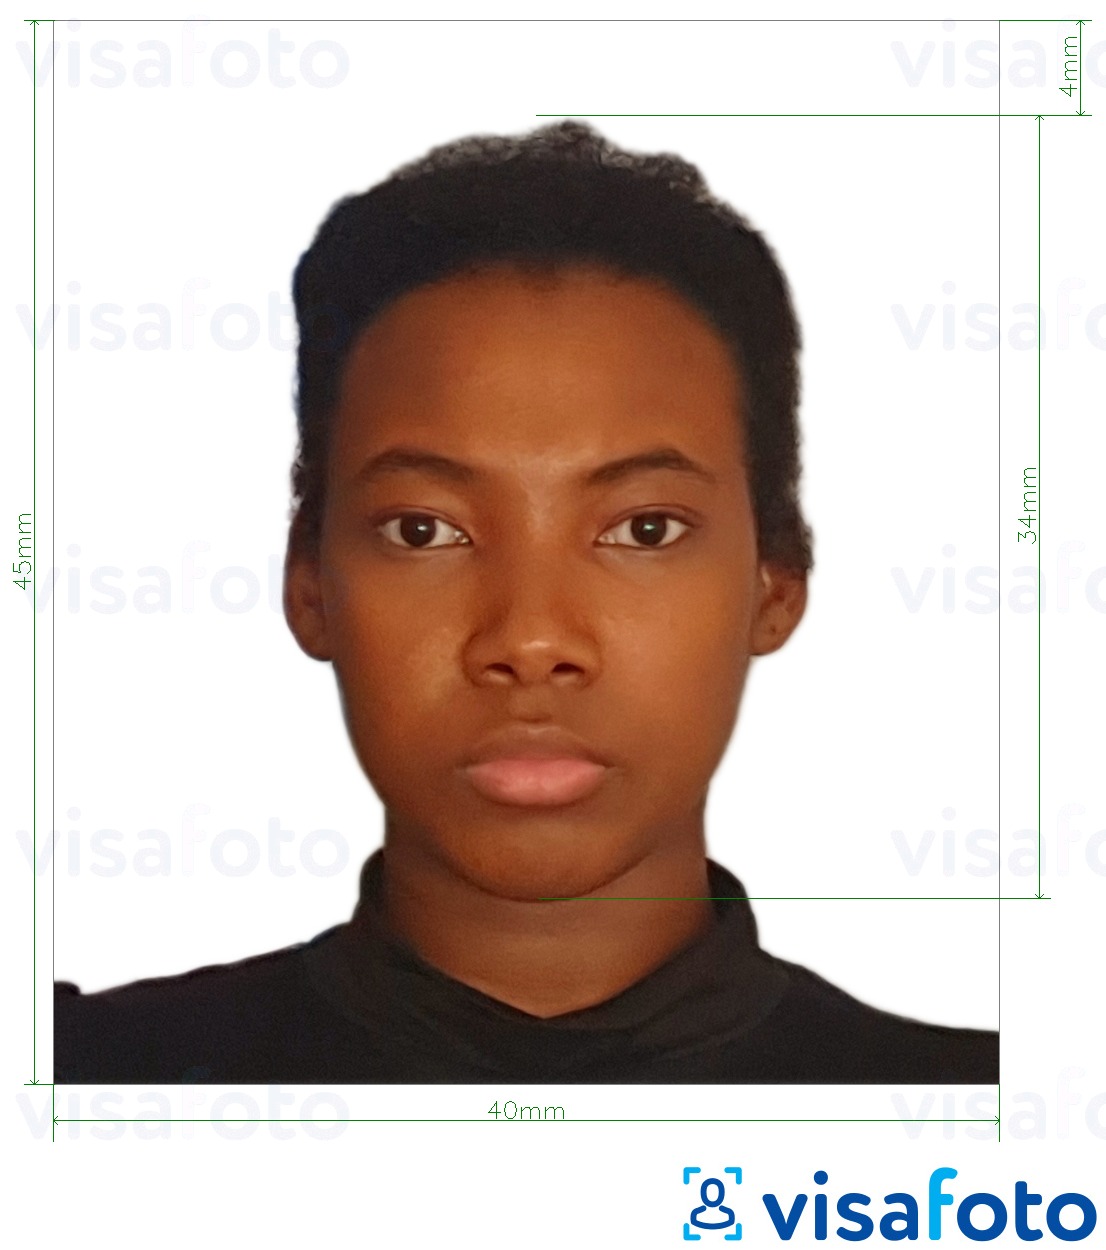 Example of photo for Tanzania passport 40x45 mm (4x4.5 cm) with exact size specification